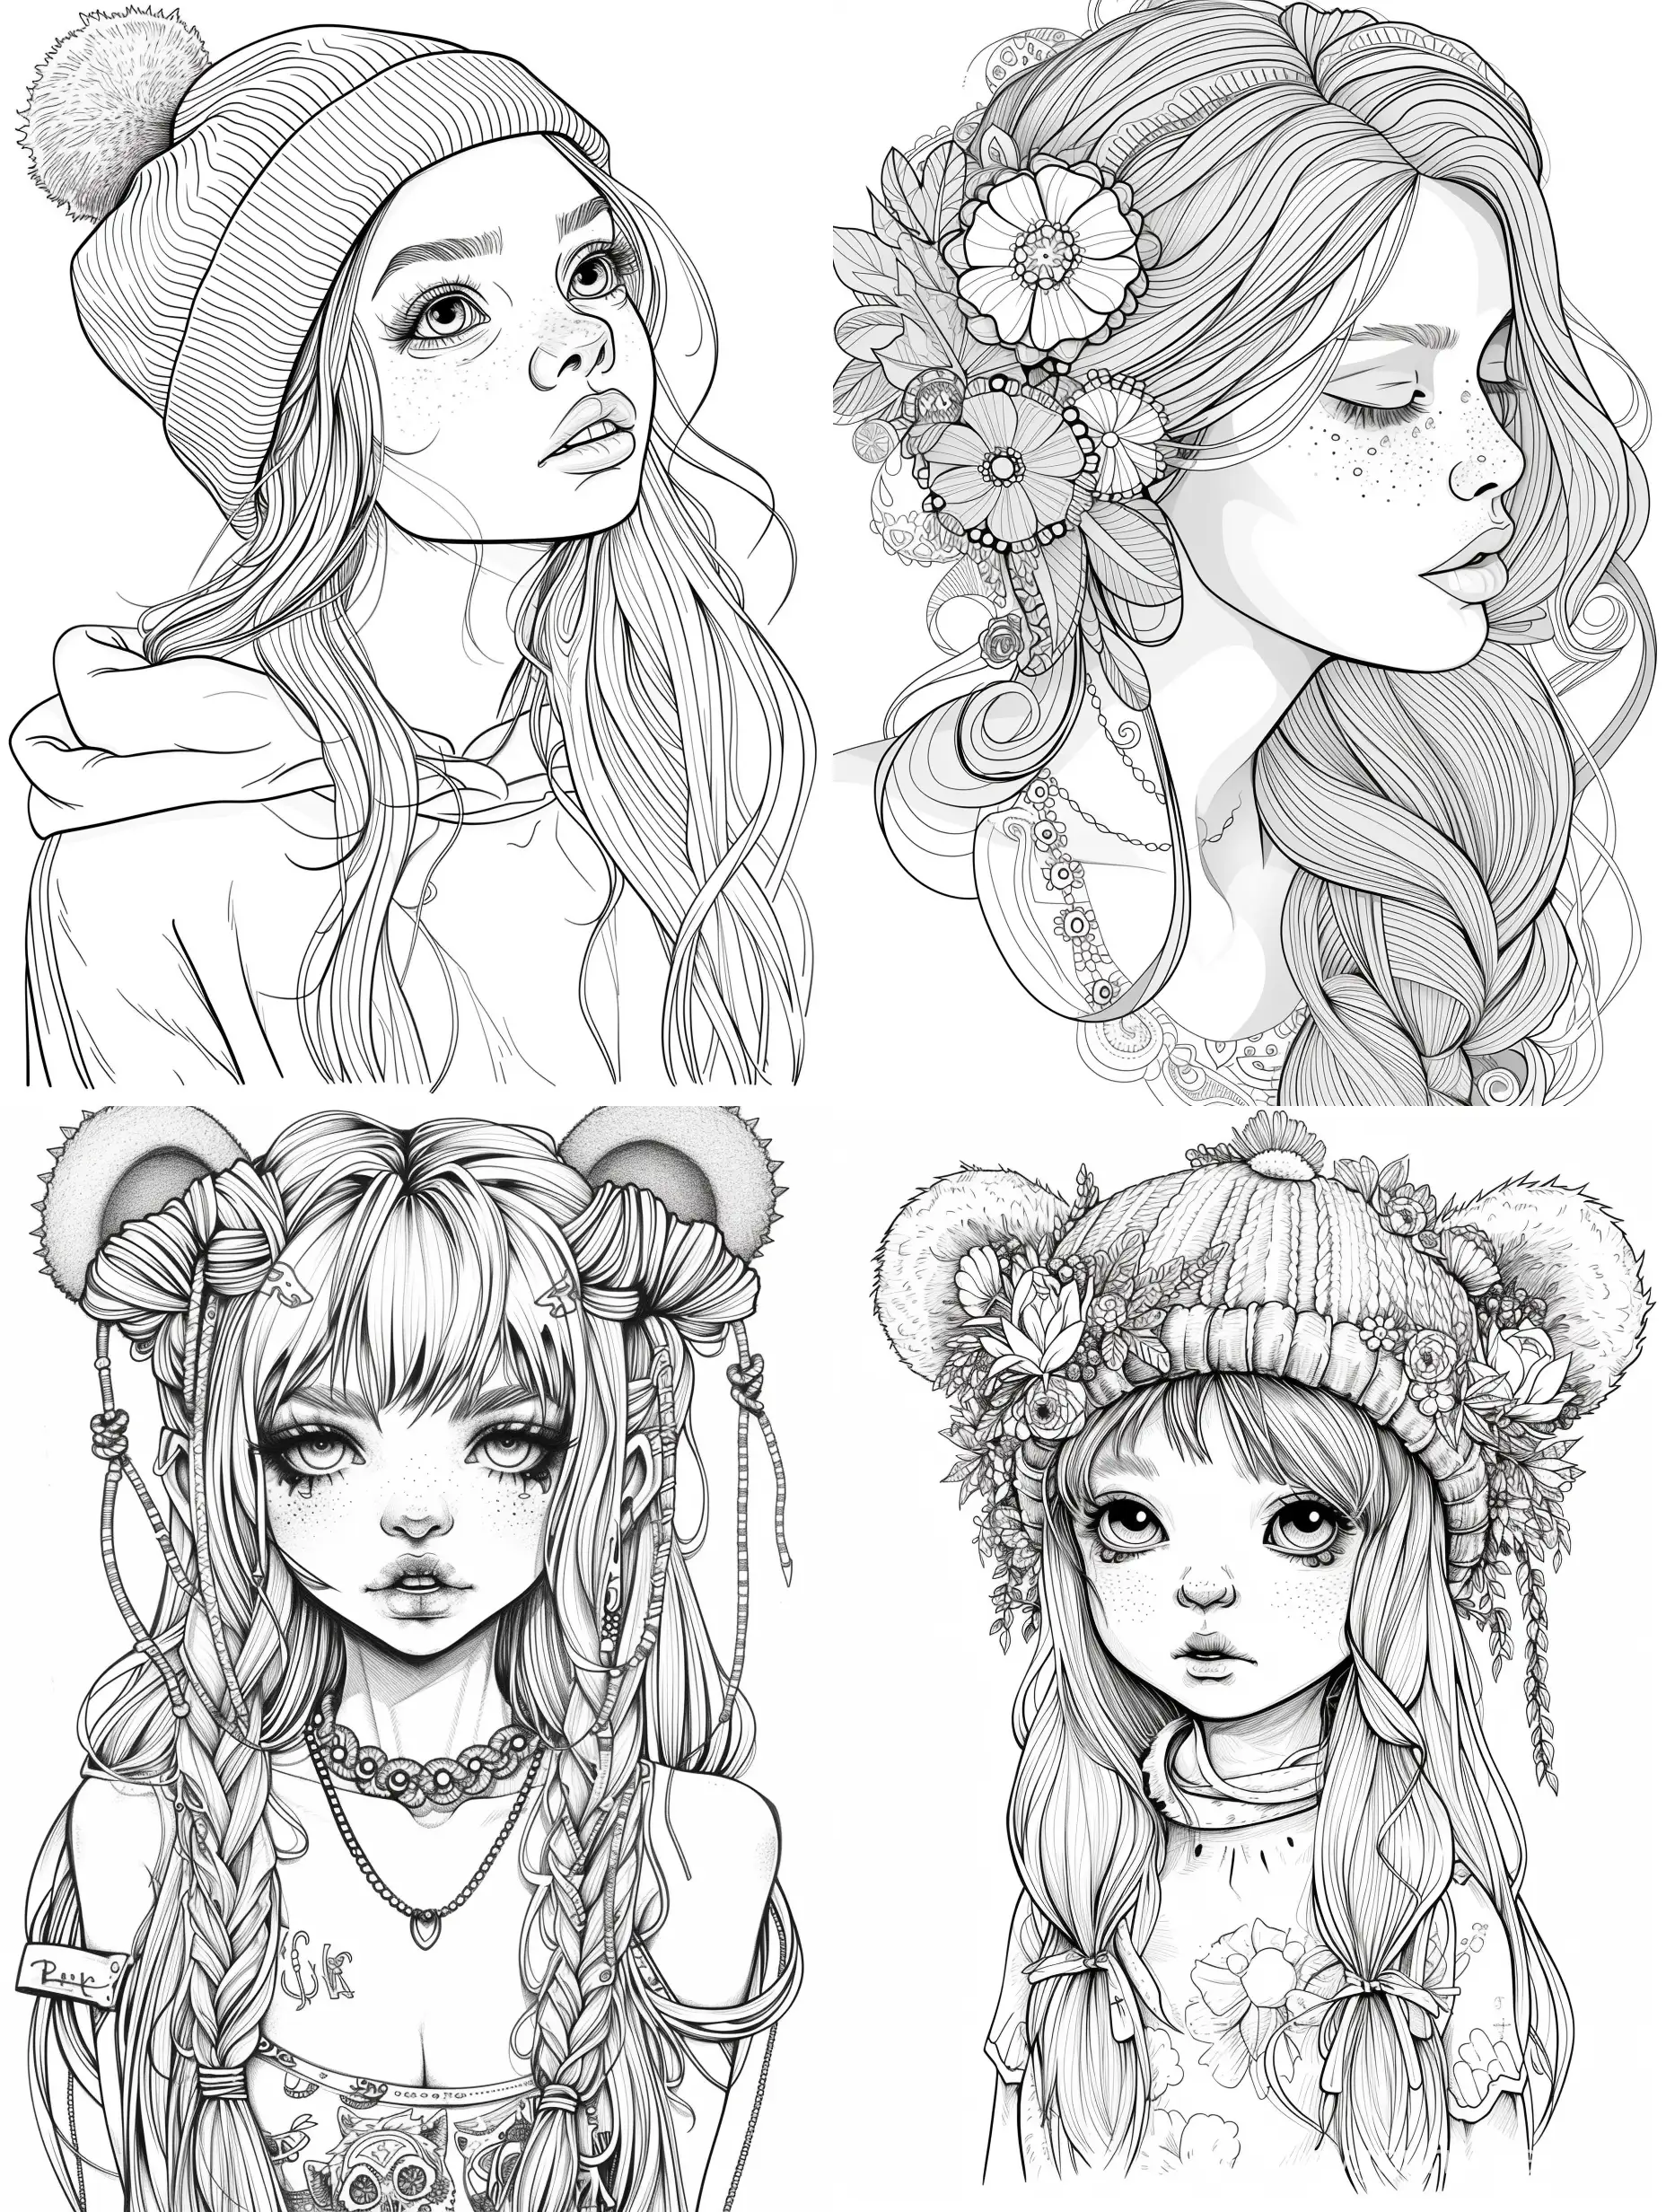 Bearbrickjia-Style-Black-and-White-Art-Girl-Coloring-Book-Vector-Graphics